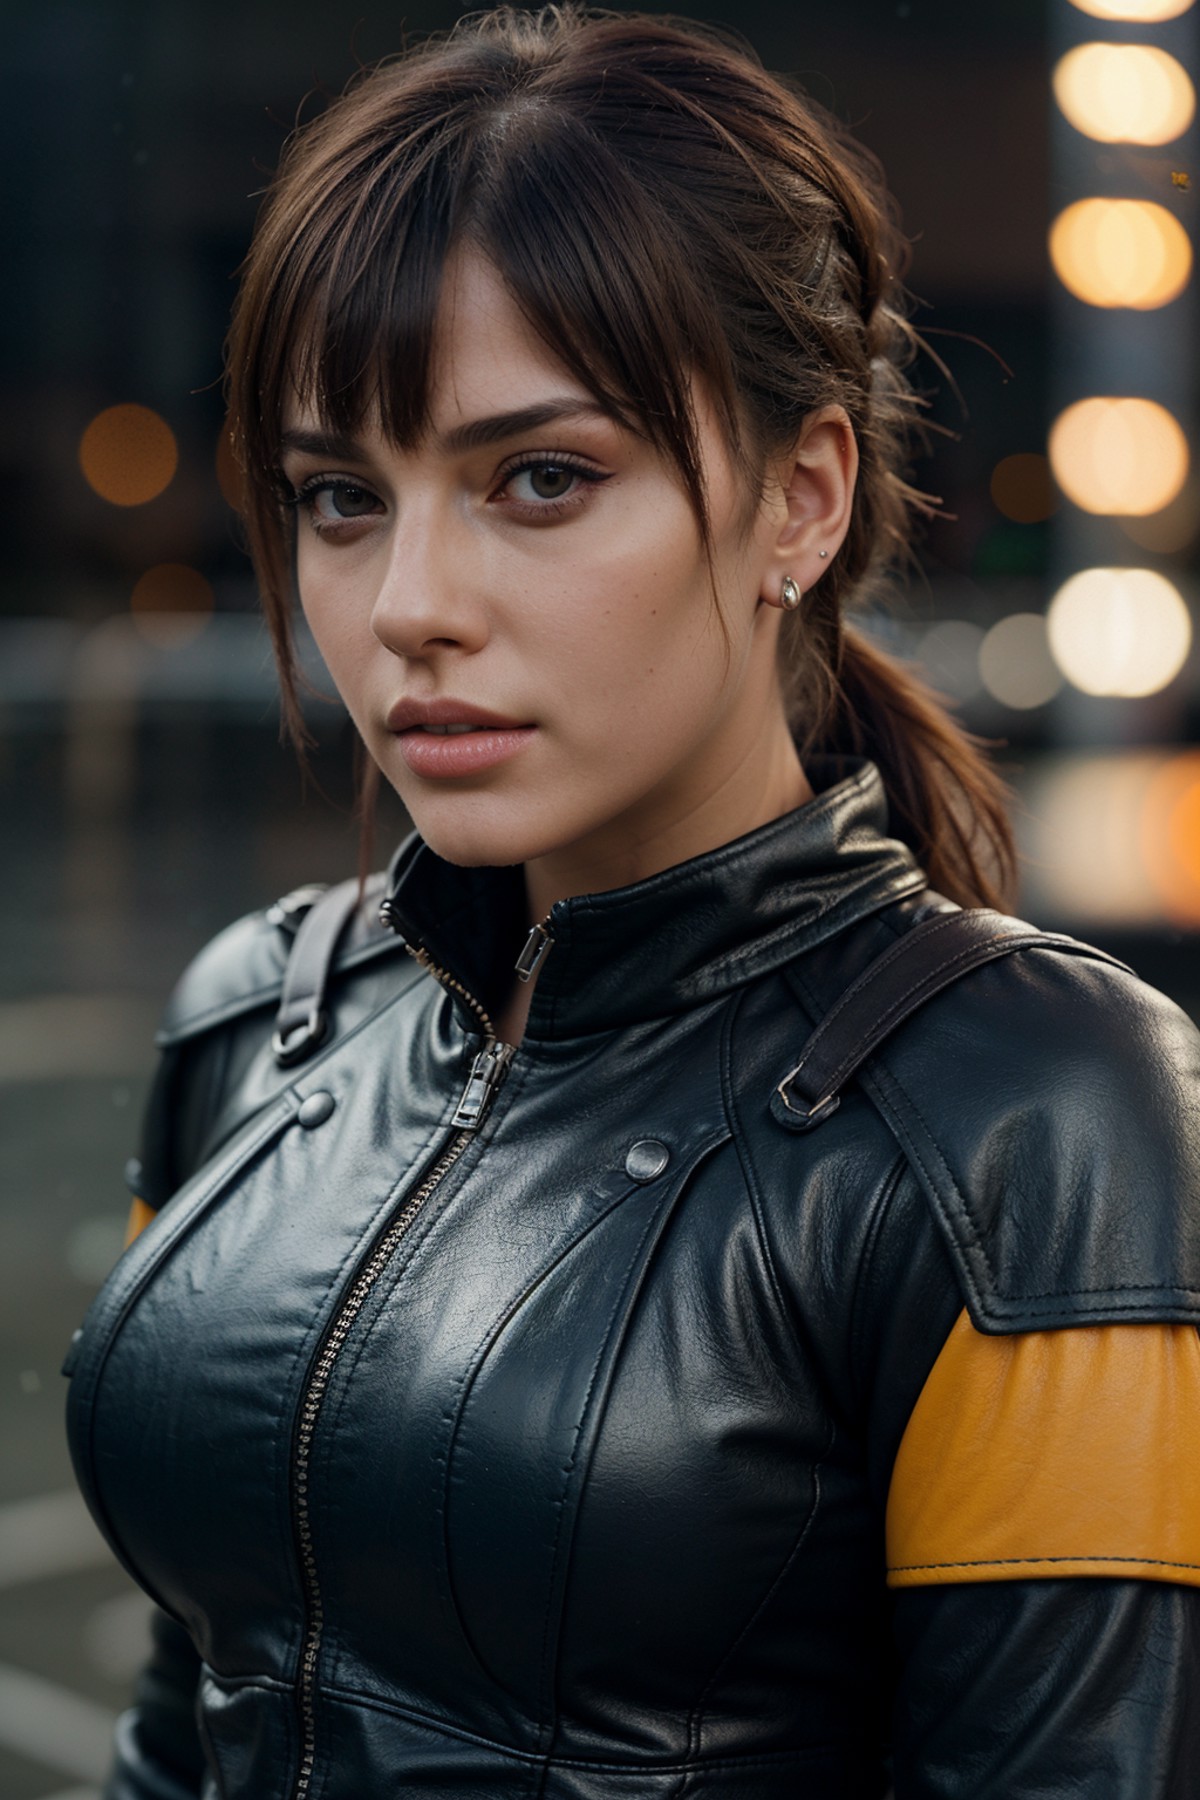 blunt bangs,hair tied back, (tacticool leather:1.1), busty, neon lighting, bokeh, rainfall in the midground, looking at ca...